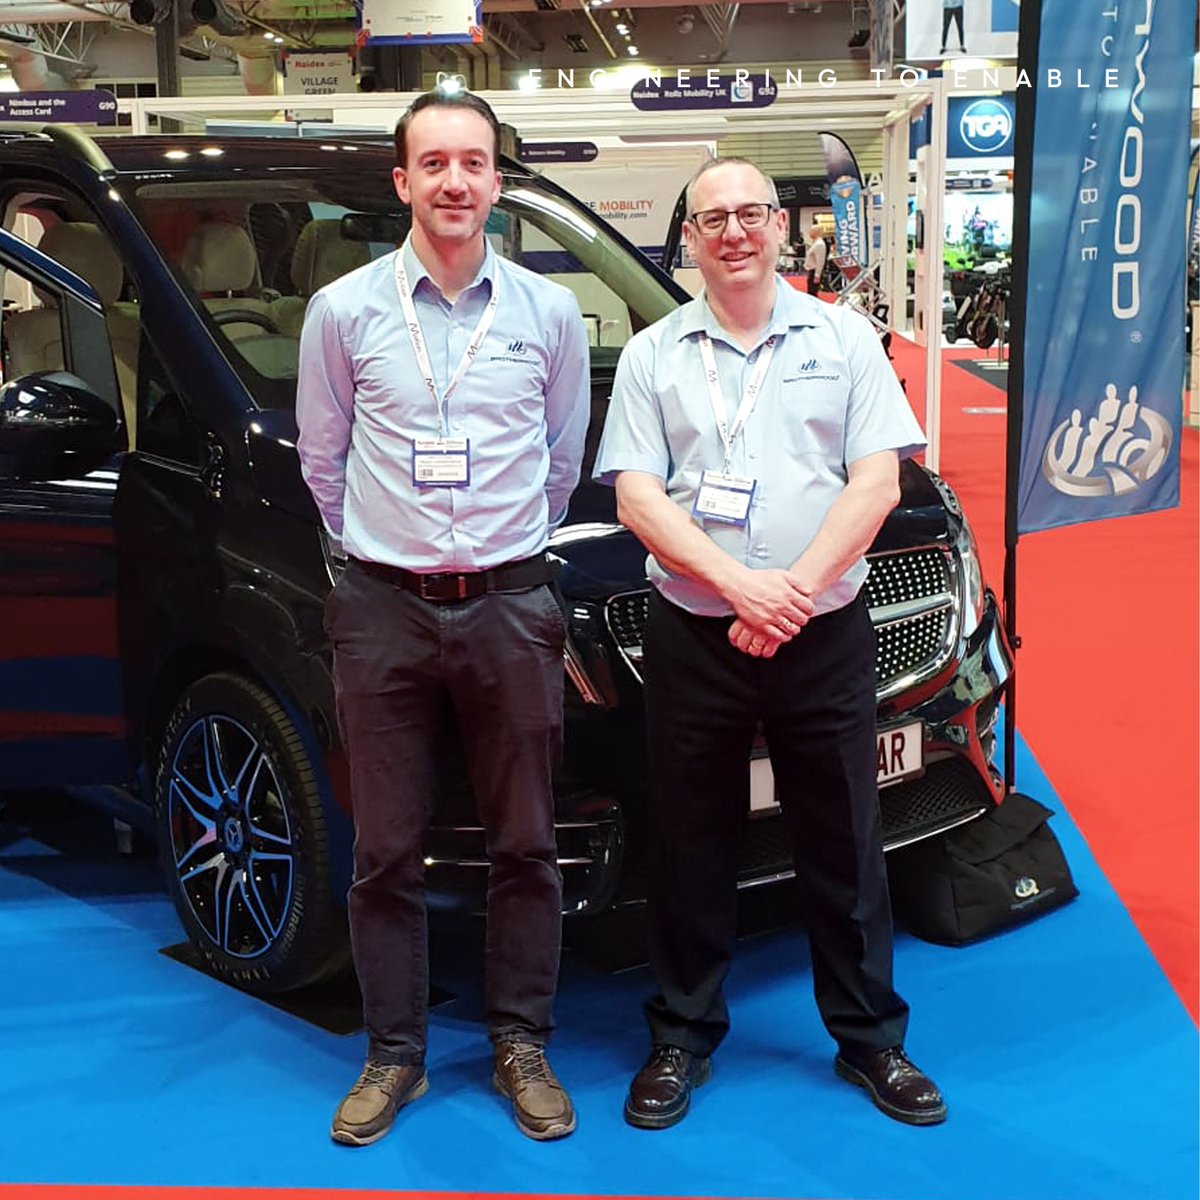 Day 2 at @NaidexShow - let's go! Come and say hello to our friendly team: Martin and Andy are ready to discuss your mobility needs and show you around our amazing Mercedes-Benz V-Class.